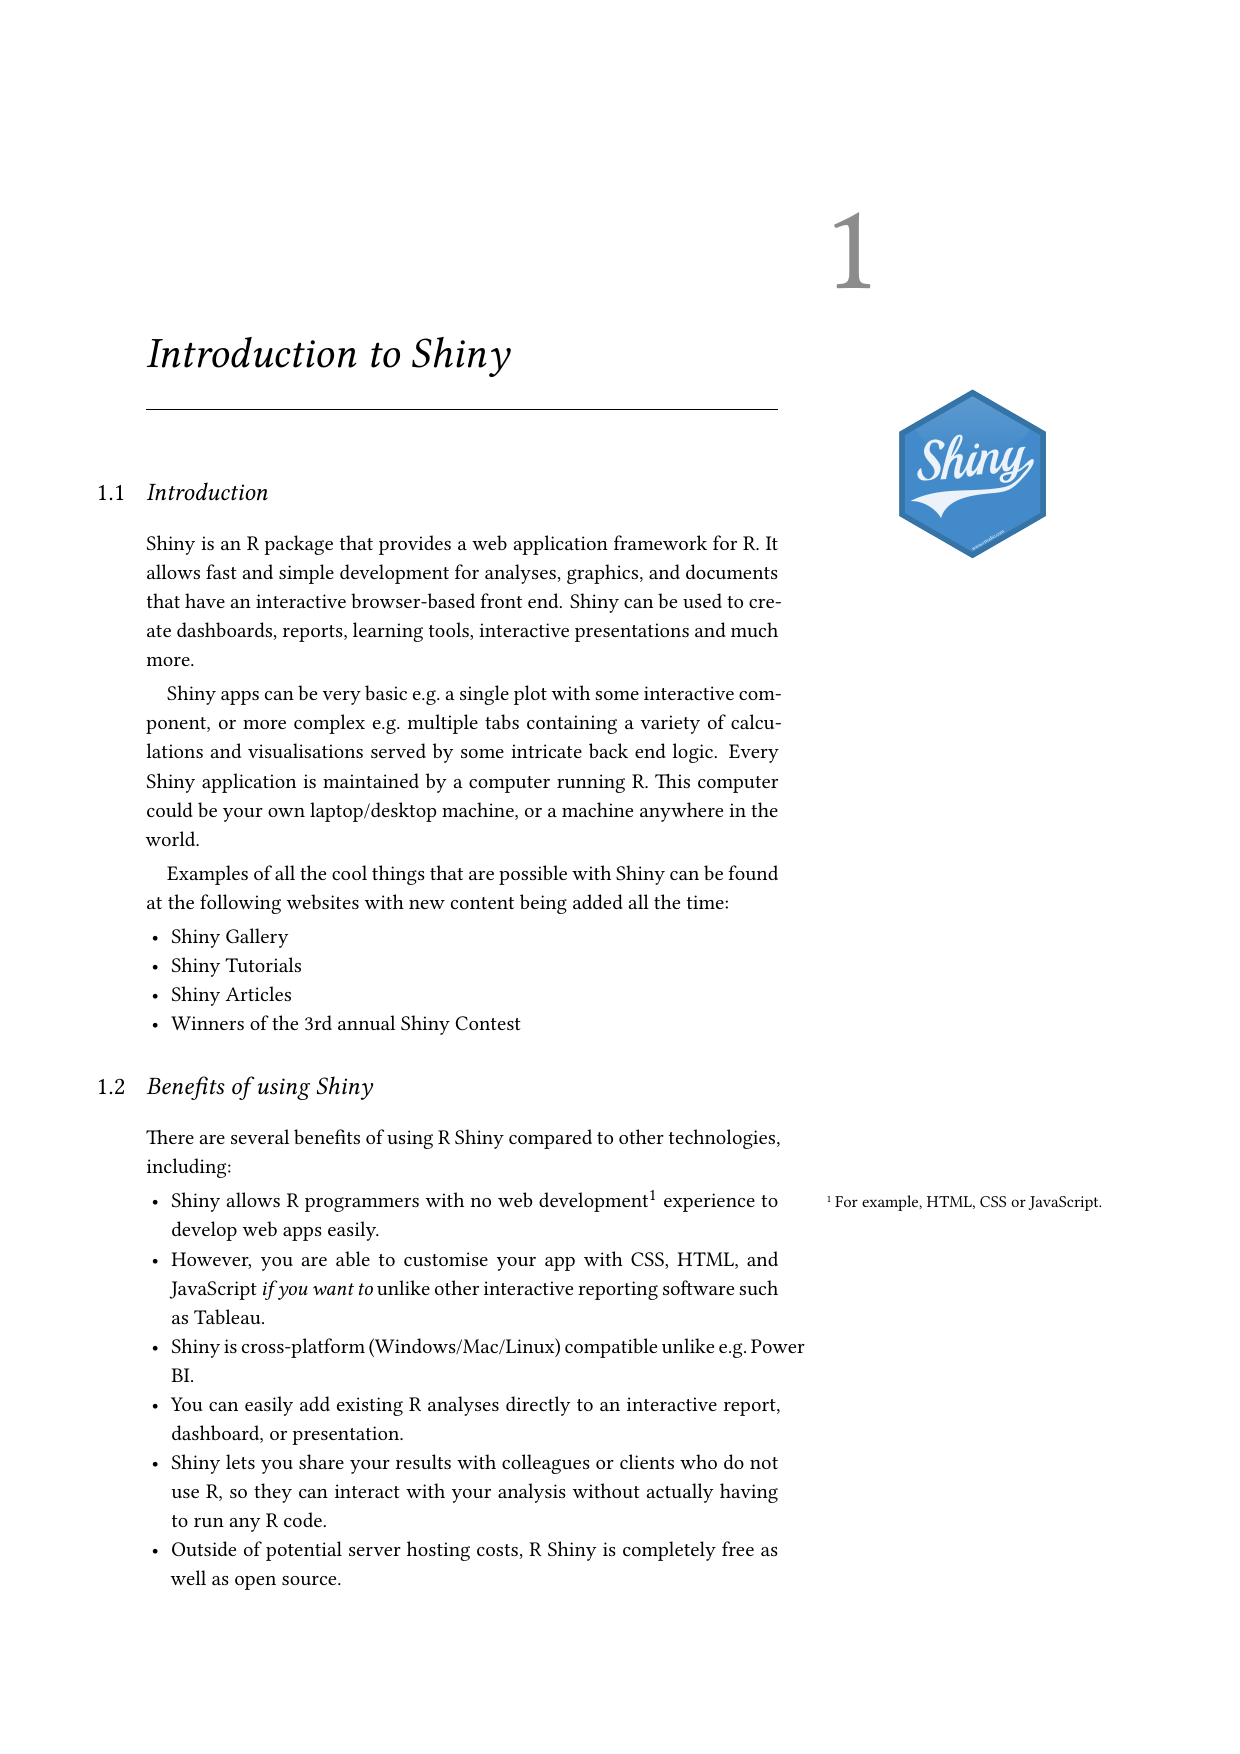 Page 2 of example course material for Introduction to Shiny